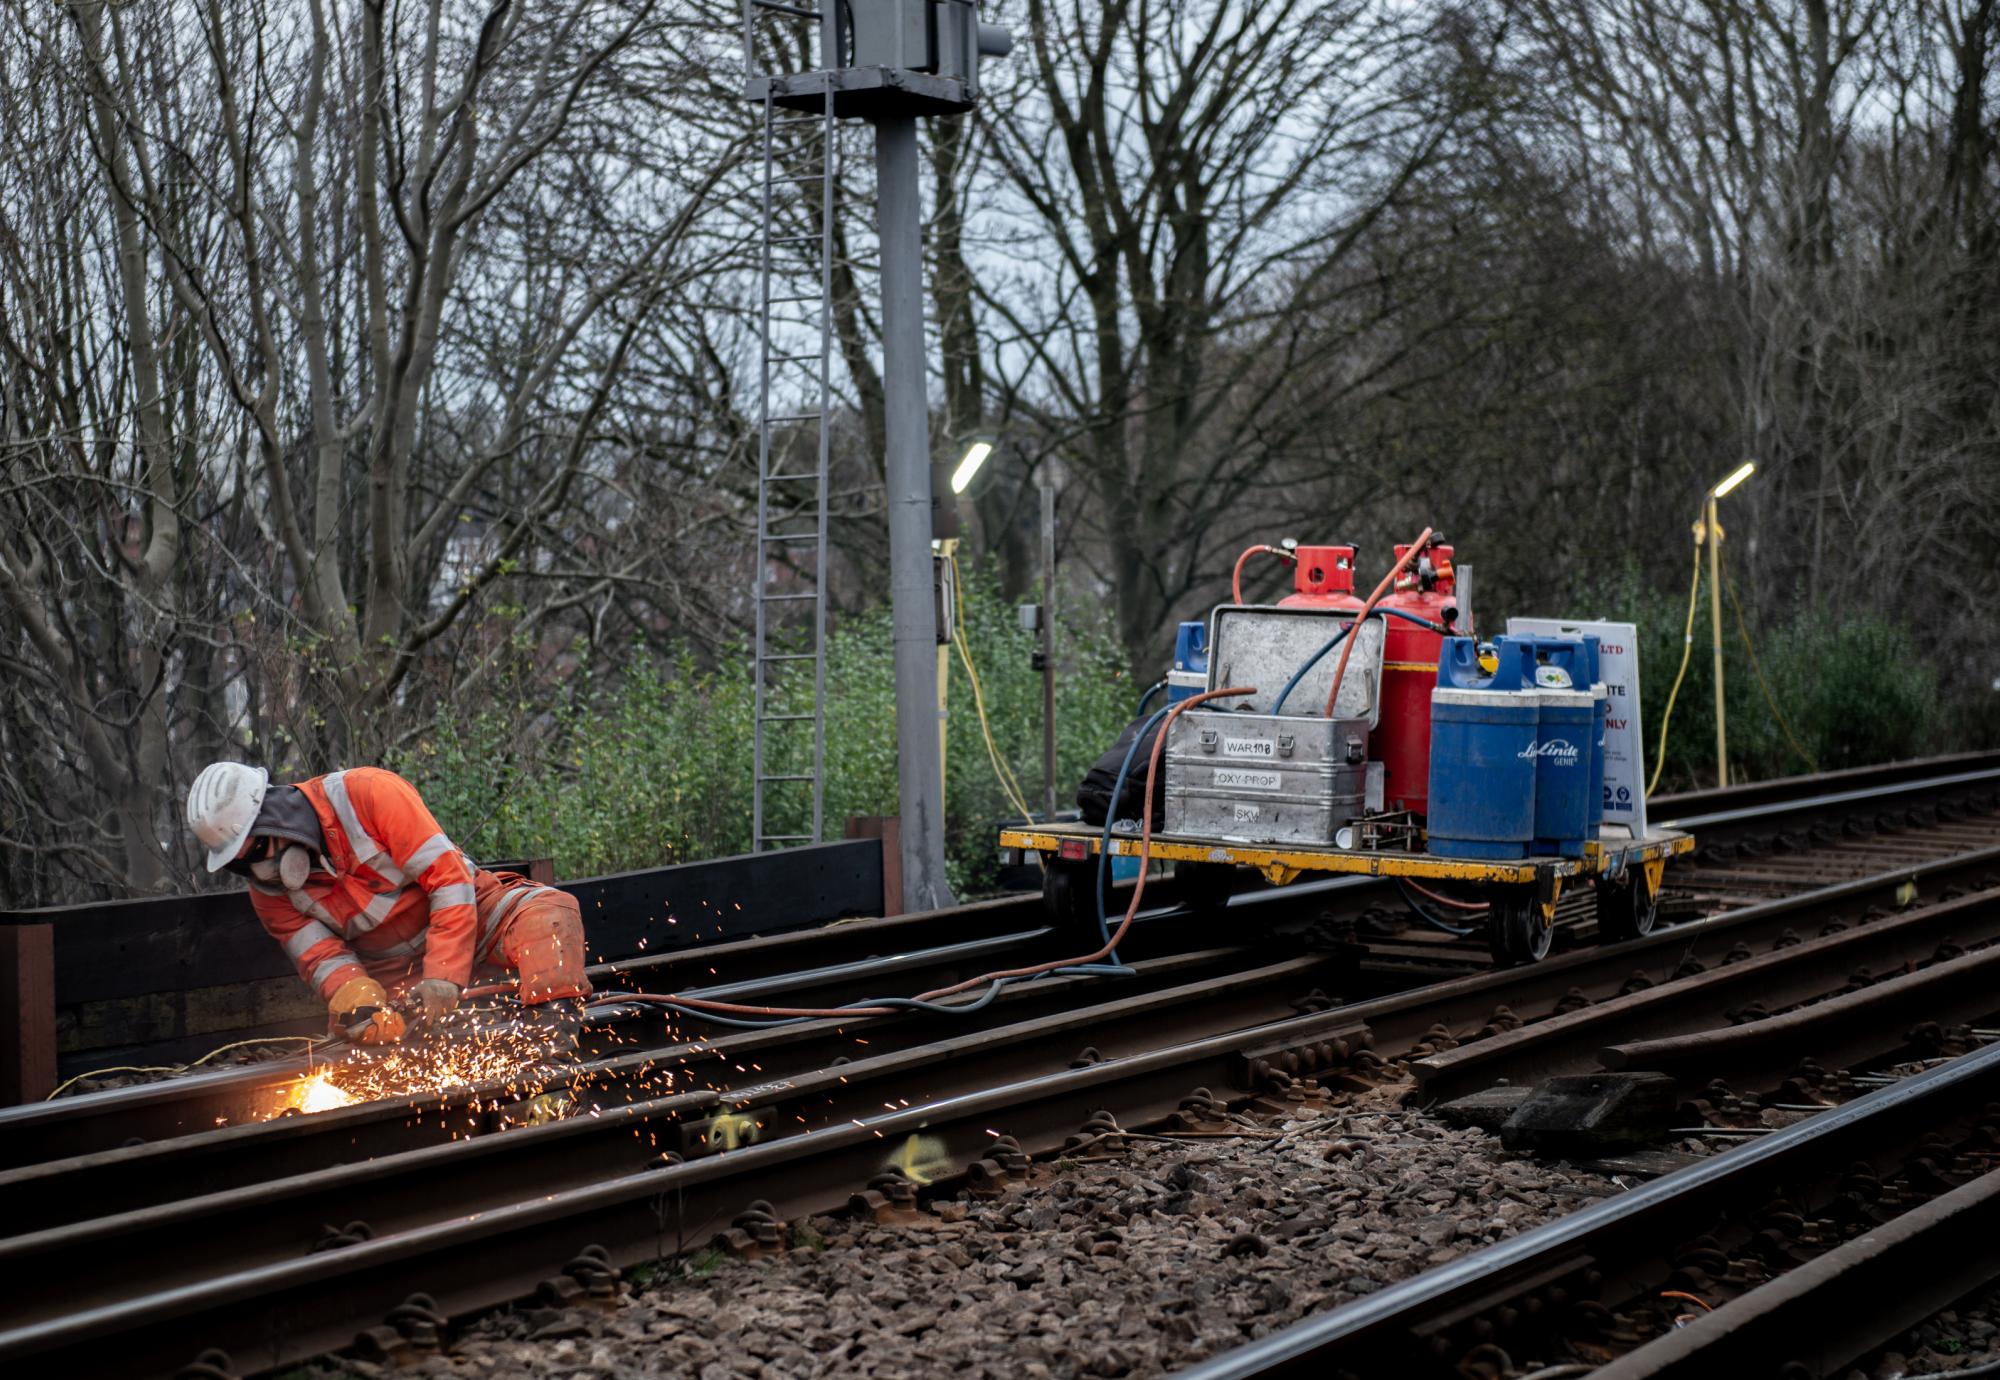 New tracks being installed near Durham station - photo by LNER